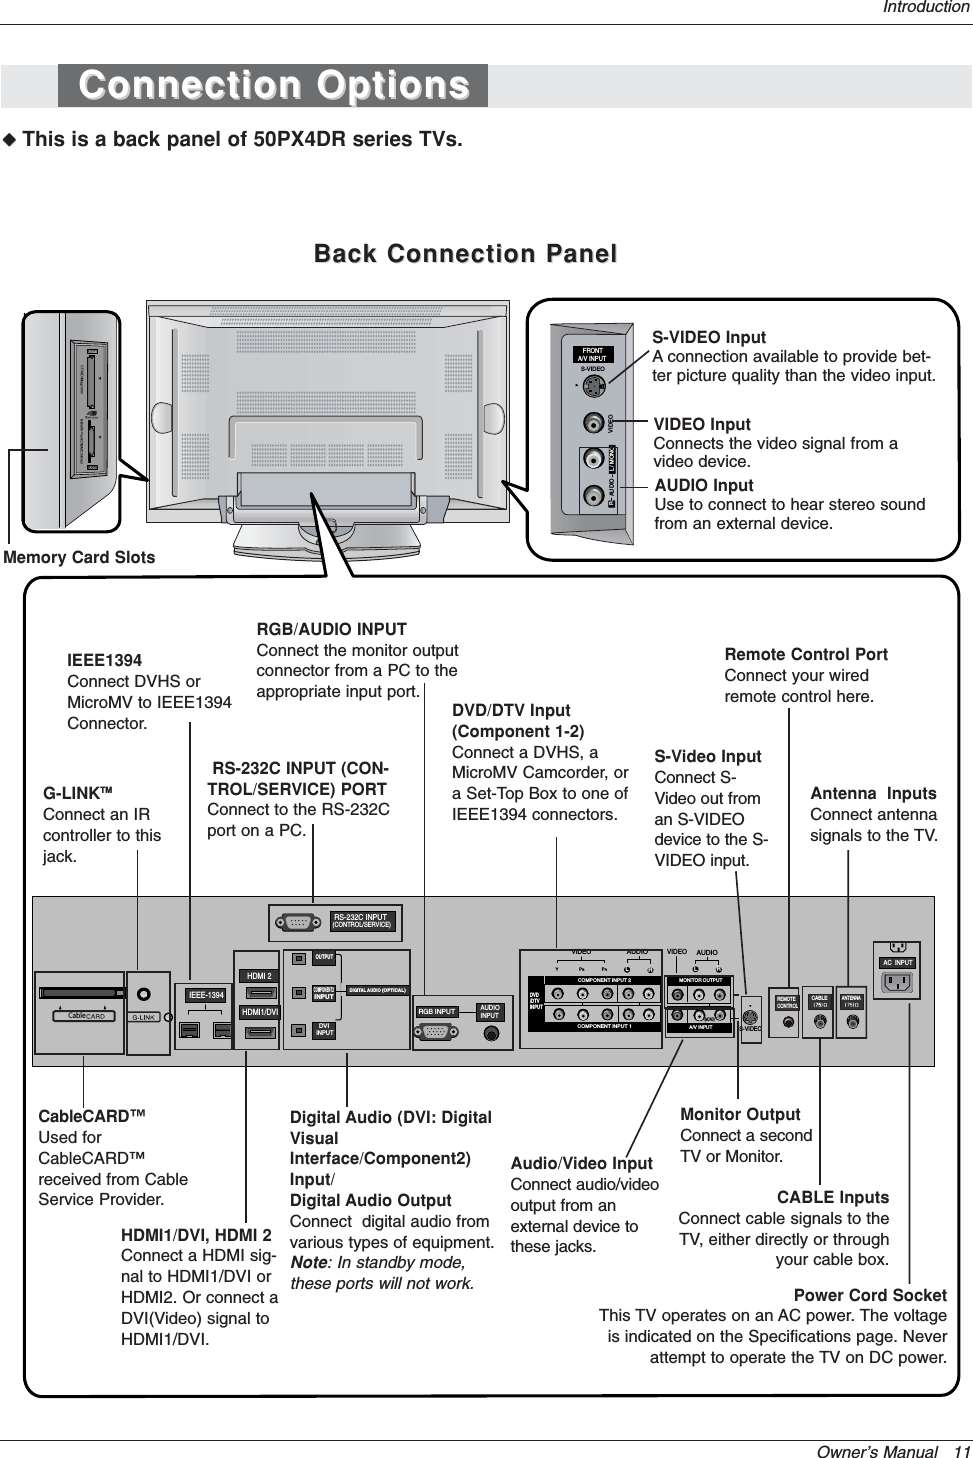 Owner’s Manual   11IntroductionConnection OptionsConnection OptionsWWThis is a back panel of 50PX4DR series TVs.RS-232C INPUT(CONTROL/SERVICE)AUDIORLDIGITAL AUDIO (OPTICAL)DVIINPUTCOMPONENT2INPUTOUTPUTAUDIOINPUTRGB INPUTVIDEOHDMI 2HDMI1/DVICOMPONENT INPUT 1RL(MONO)CABLEANTENNA AC  INPUTDVD/DTVINPUTIEEE-1394COMPONENT INPUT 2MONITOR OUTPUTA/V INPUT VIDEOAUDIOCableS-VIDEOREMOTECONTROLS-VIDEO   FRONTA/V INPUTVIDEO L / MONO AUDIORS-VIDEO InputA connection available to provide bet-ter picture quality than the video input.Memory Card SlotsG-LINKTMConnect an IRcontroller to thisjack.CableCARD™Used forCableCARD™received from CableService Provider.VIDEO InputConnects the video signal from avideo device.AUDIO InputUse to connect to hear stereo soundfrom an external device.Antenna  InputsConnect antennasignals to the TV.RGB/AUDIO INPUTConnect the monitor outputconnector from a PC to theappropriate input port.Digital Audio (DVI: DigitalVisualInterface/Component2)Input/Digital Audio OutputConnect  digital audio fromvarious types of equipment.Note: In standby mode, these ports will not work.DVD/DTV Input(Component 1-2)Connect a DVHS, aMicroMV Camcorder, ora Set-Top Box to one ofIEEE1394 connectors.Monitor OutputConnect a secondTV or Monitor.Remote Control PortConnect your wiredremote control here.S-Video InputConnect S-Video out froman S-VIDEOdevice to the S-VIDEO input.CABLE InputsConnect cable signals to theTV, either directly or throughyour cable box.RS-232C INPUT (CON-TROL/SERVICE) PORTConnect to the RS-232Cport on a PC.HDMI1/DVI, HDMI 2Connect a HDMI sig-nal to HDMI1/DVI orHDMI2. Or connect aDVI(Video) signal toHDMI1/DVI.Audio/Video InputConnect audio/videooutput from anexternal device tothese jacks.Power Cord SocketThis TV operates on an AC power. The voltageis indicated on the Specifications page. Neverattempt to operate the TV on DC power.IEEE1394Connect DVHS orMicroMV to IEEE1394Connector.Back Connection PanelBack Connection Panel